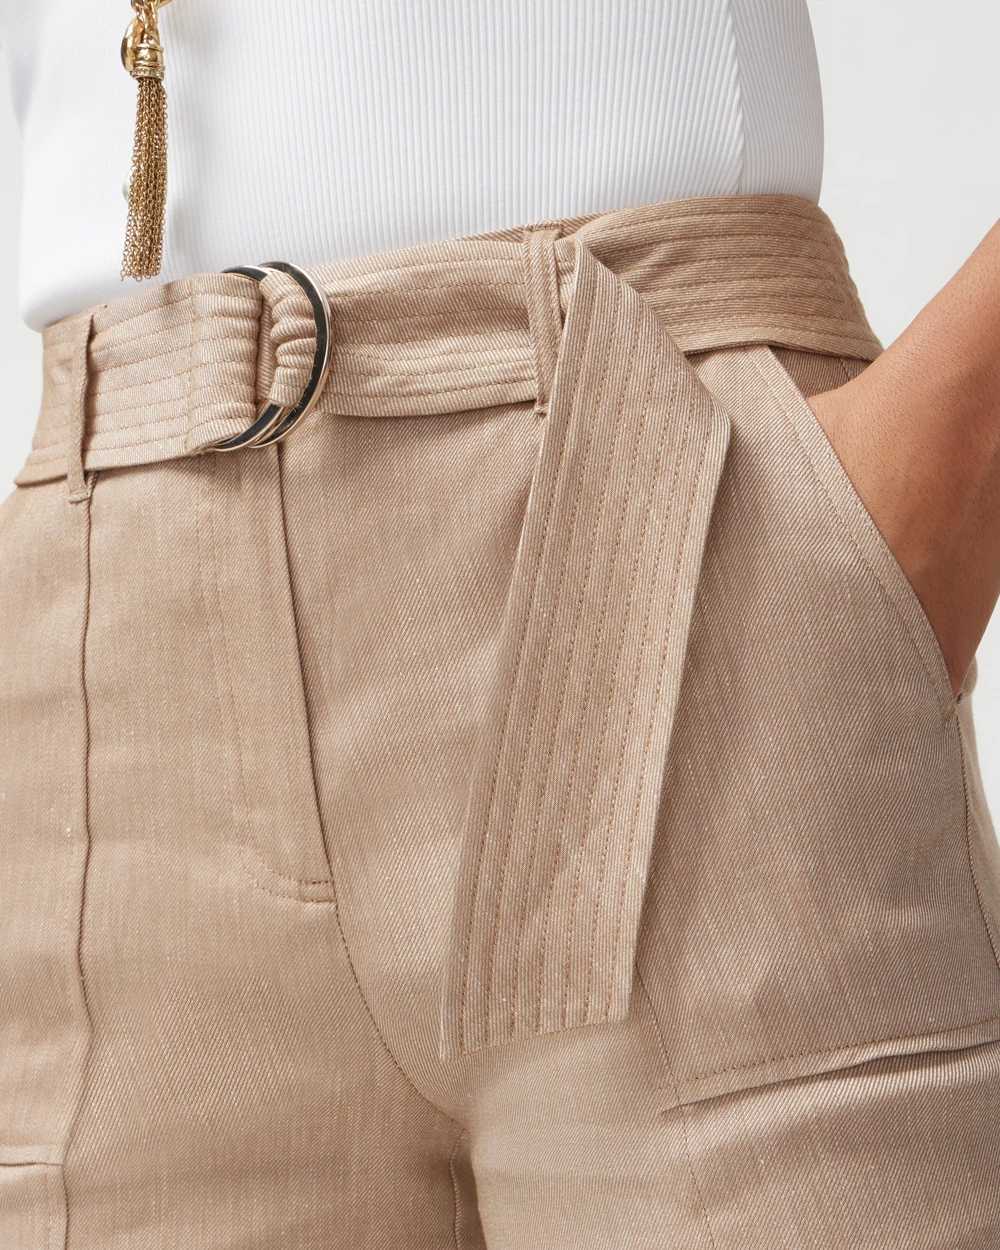 Linen Belted Utility Pant click to view larger image.